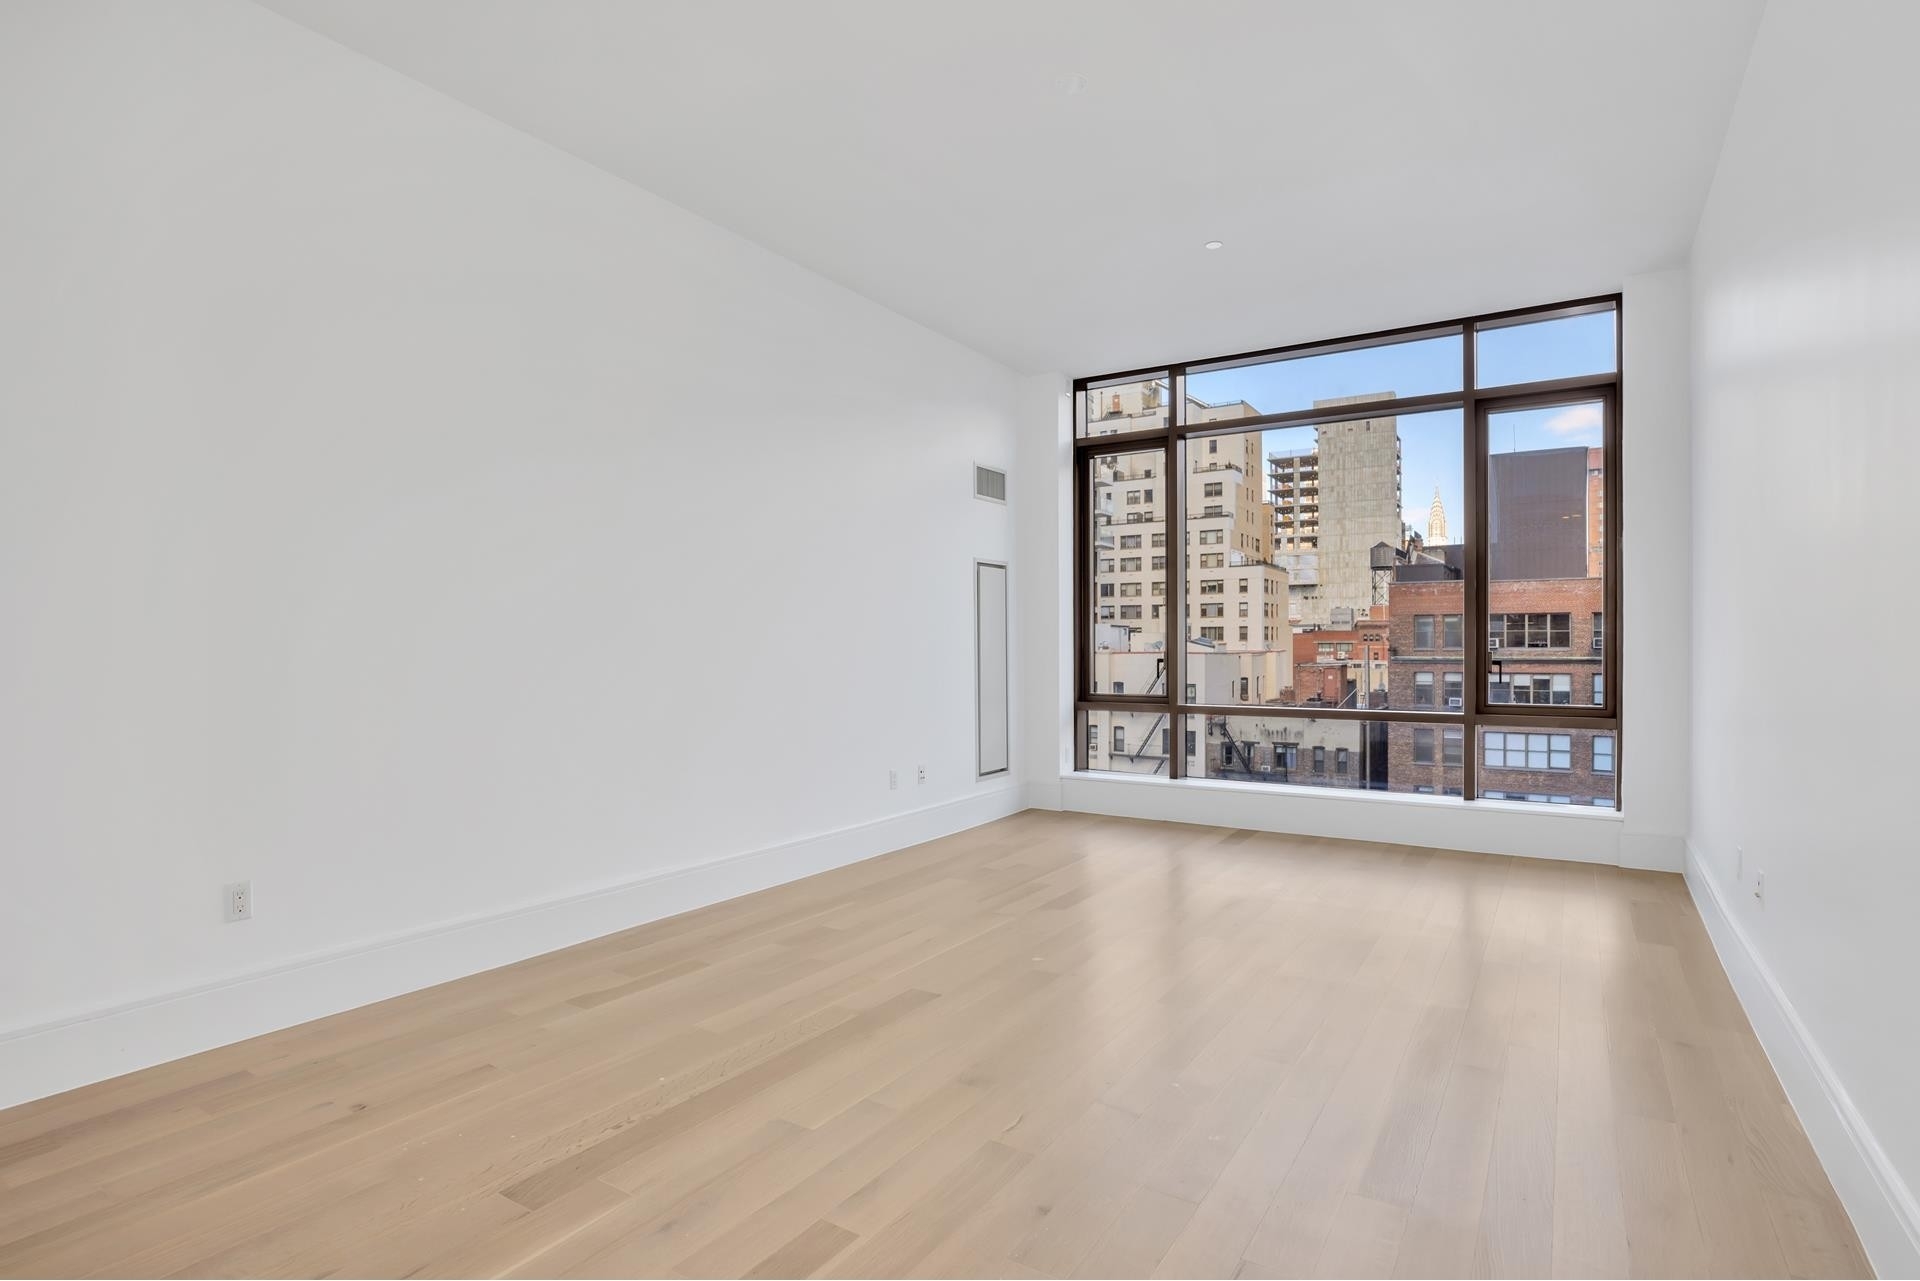 11. Condominiums for Sale at Gramercy Square, 215 E 19TH ST, 6D Gramercy Park, New York, NY 10003